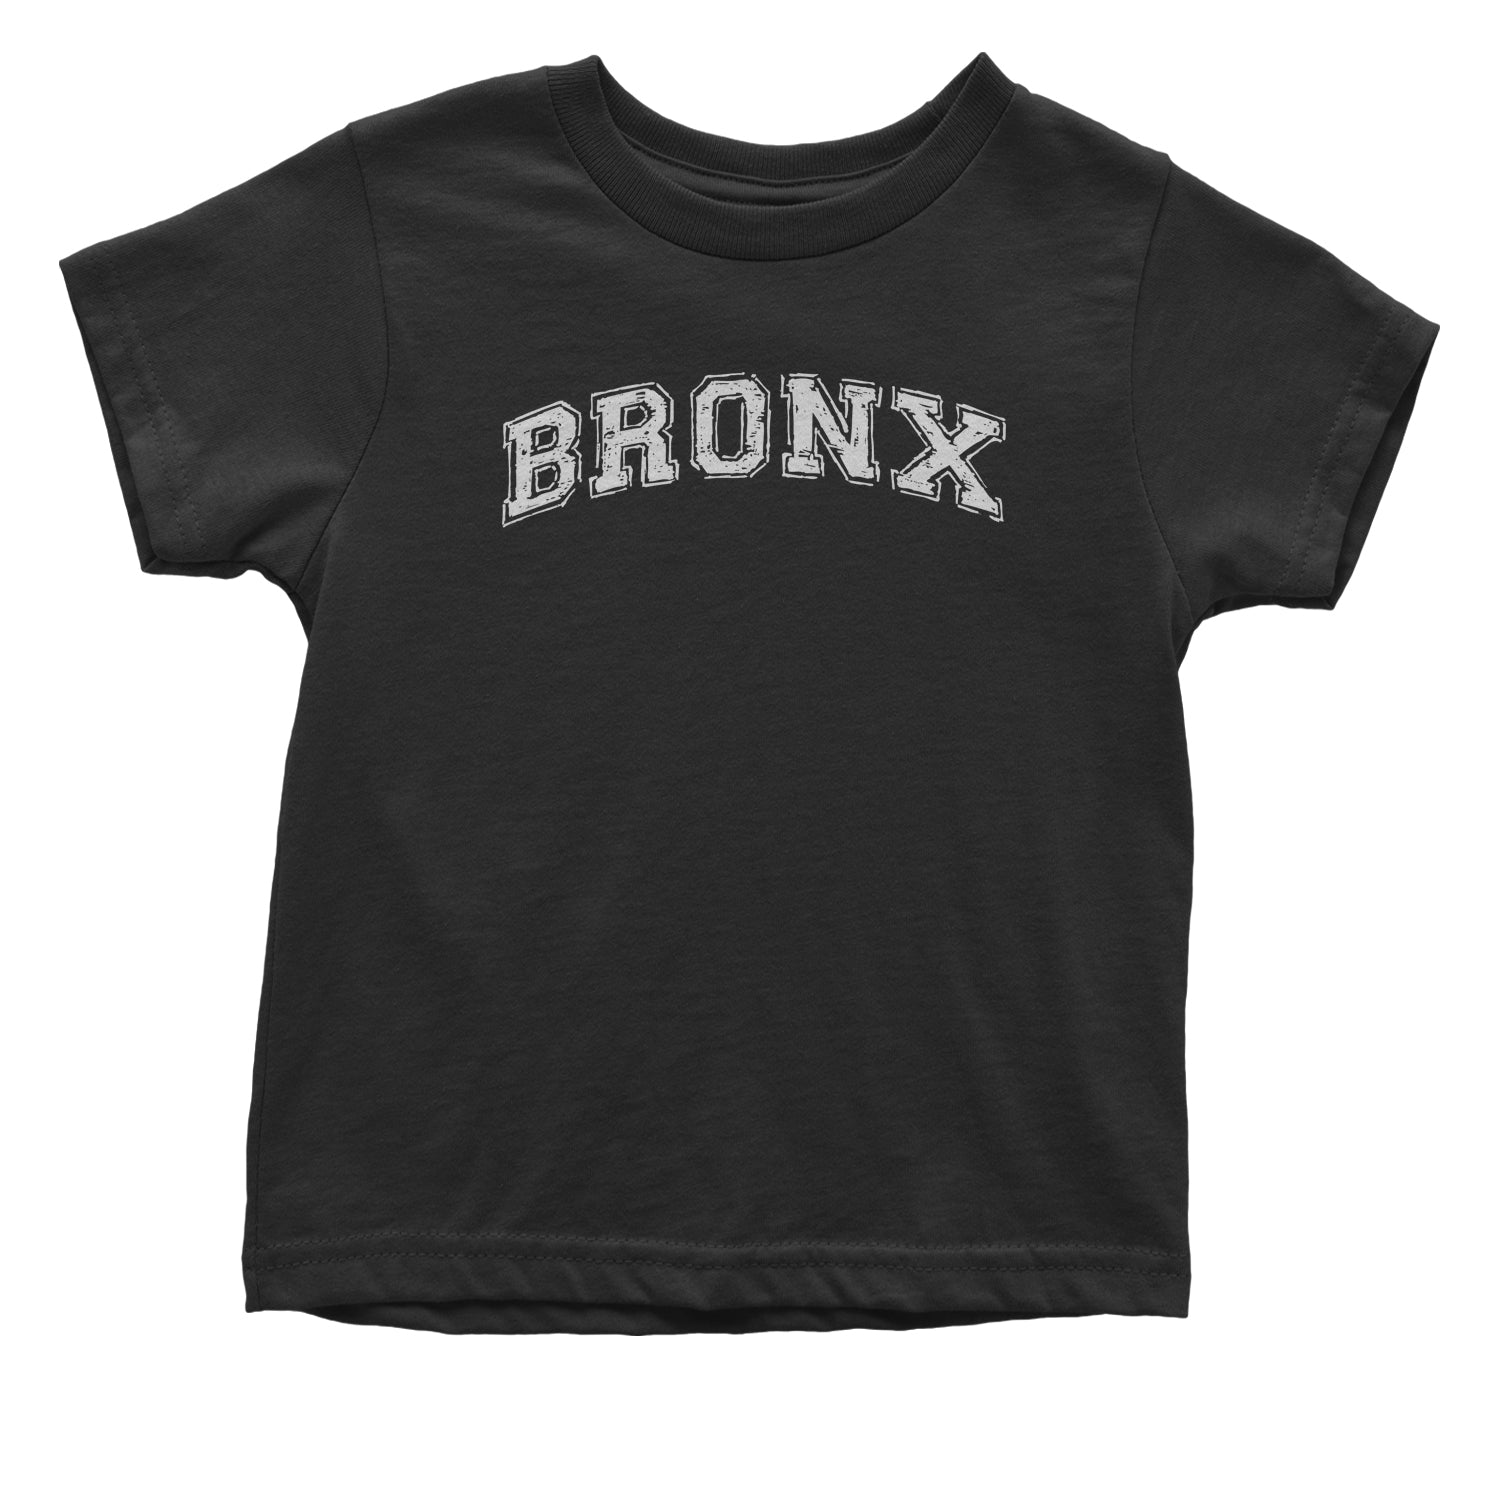 Bronx - From The Block Toddler T-Shirt b, cardi, concert, its, Jennifer, lopez, merch, my, party, tour by Expression Tees